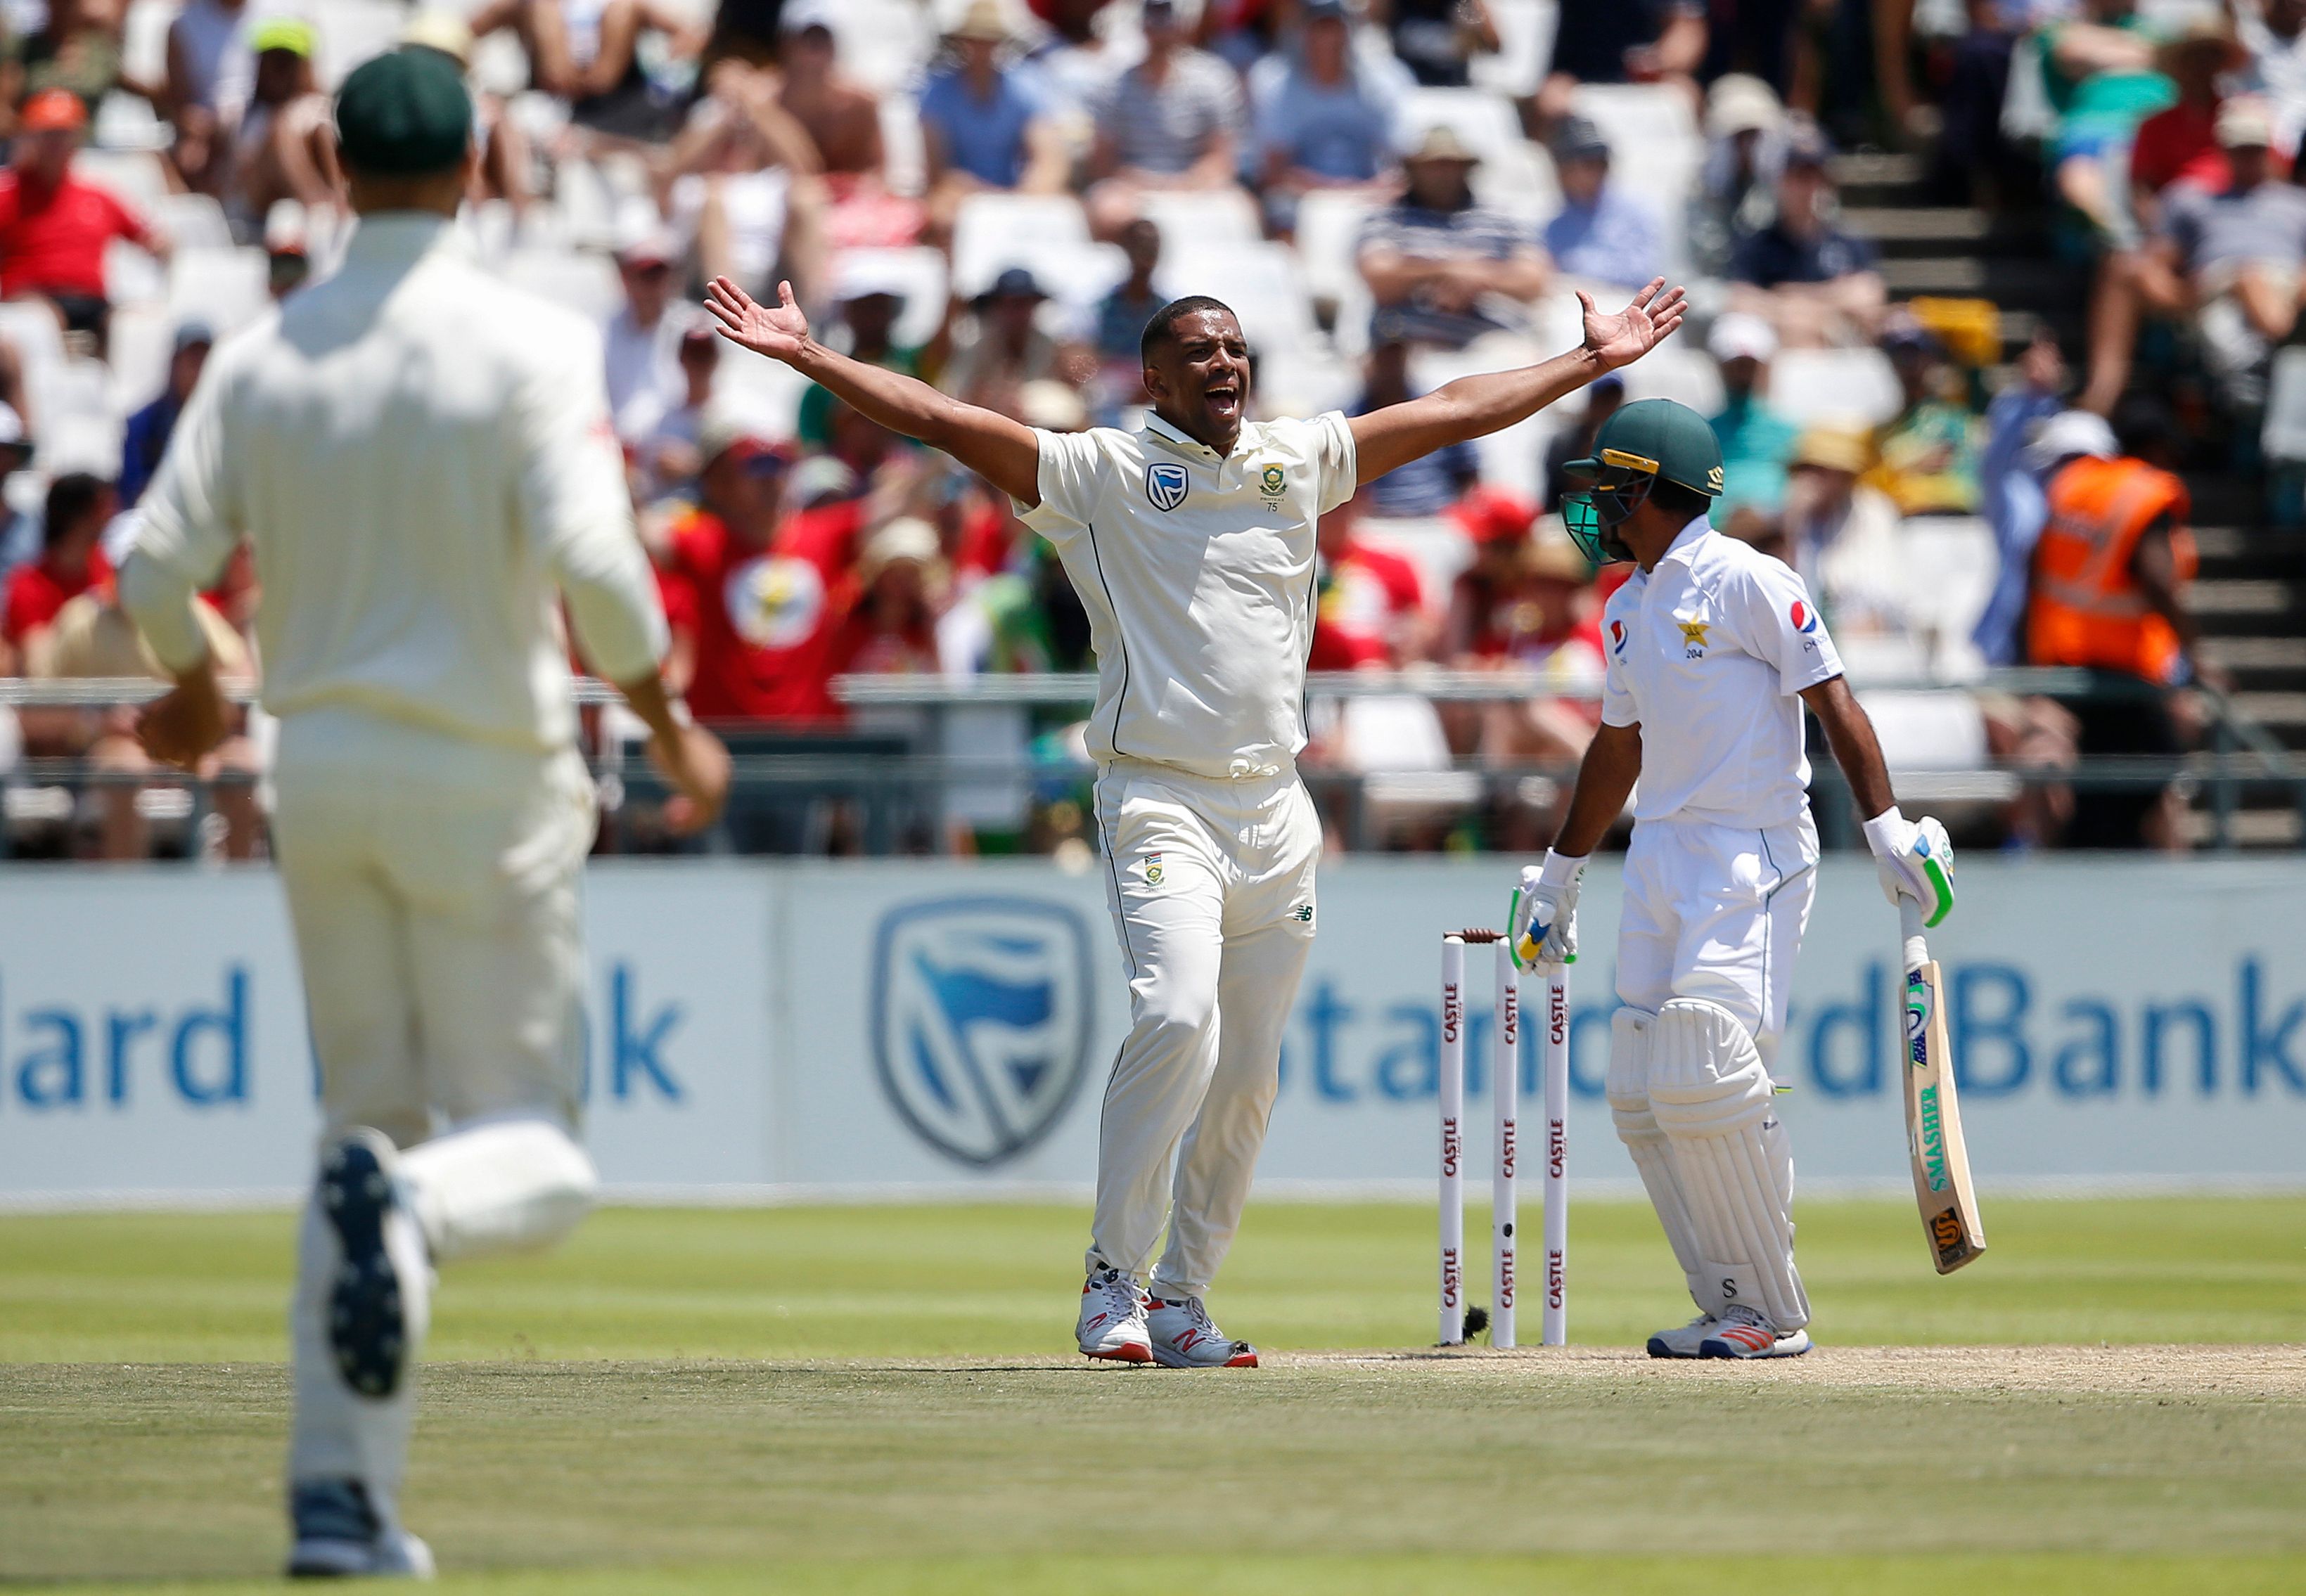 South Africa beat Pakistan by 9 wickets to clinch Test series 